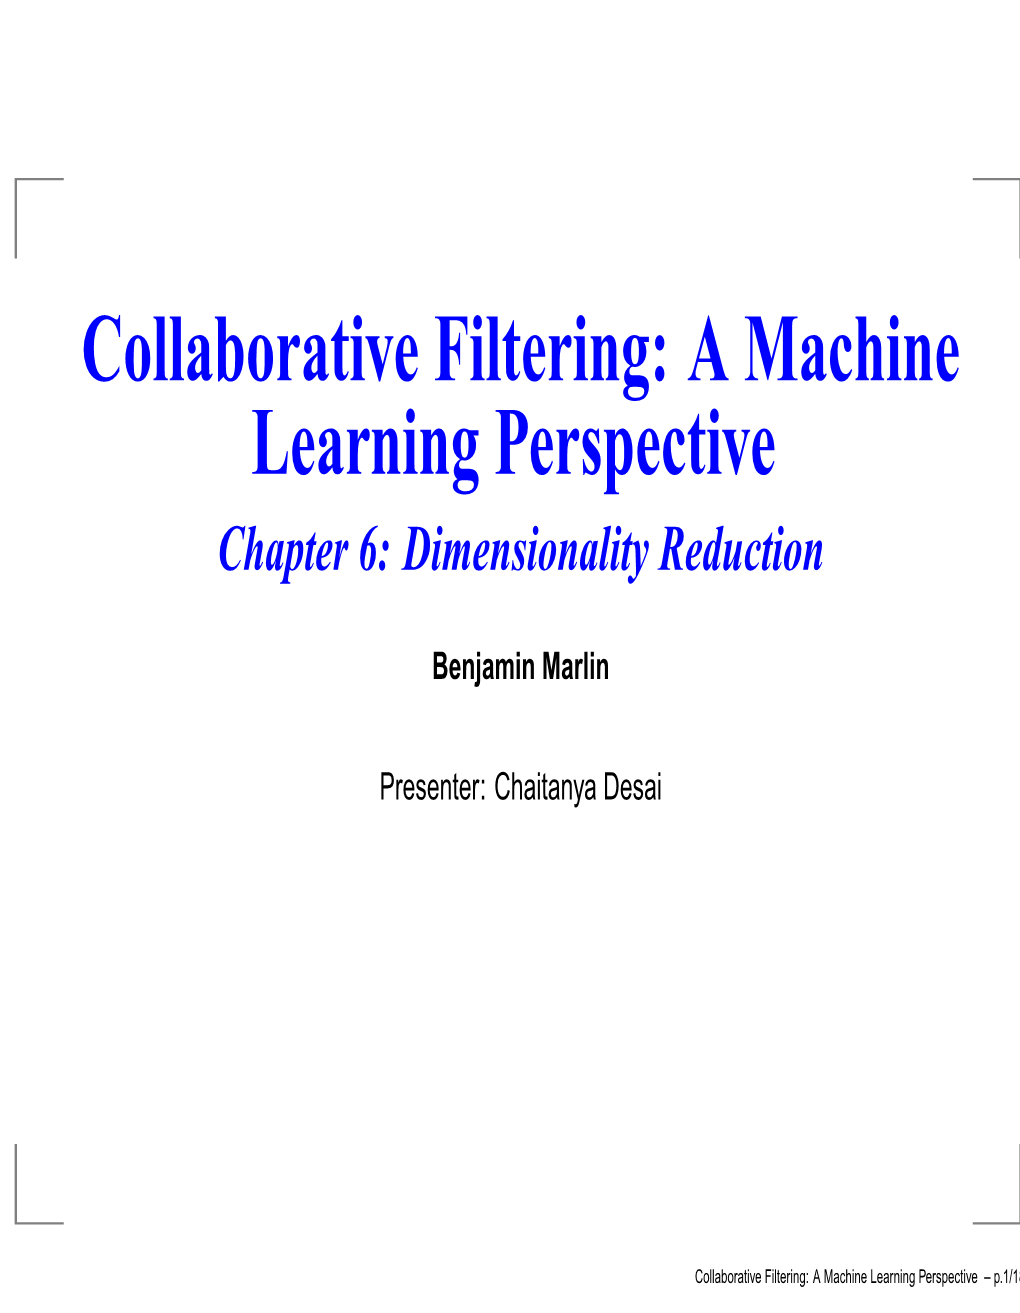 Collaborative Filtering: a Machine Learning Perspective Chapter 6: Dimensionality Reduction